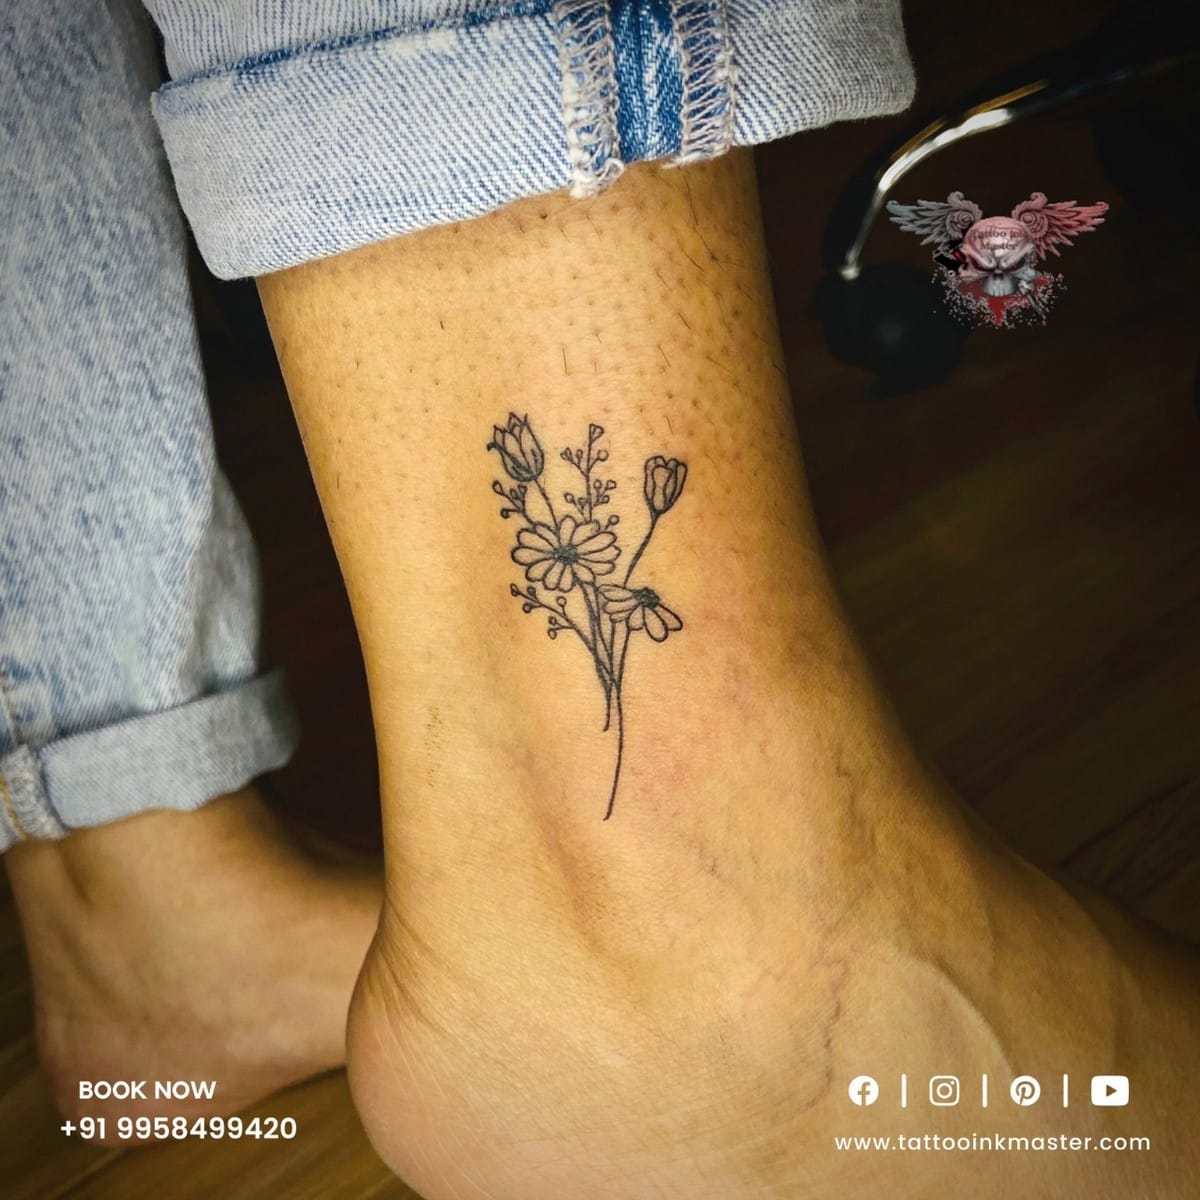 40 Gorgeous And Stunning Ankle Floral Tattoo Ideas For Your Inspiration -  Women Fashion Lifestyle Blog Shinecoco.com | Ankle tattoos for women, Inner ankle  tattoos, Tattoos for women flowers